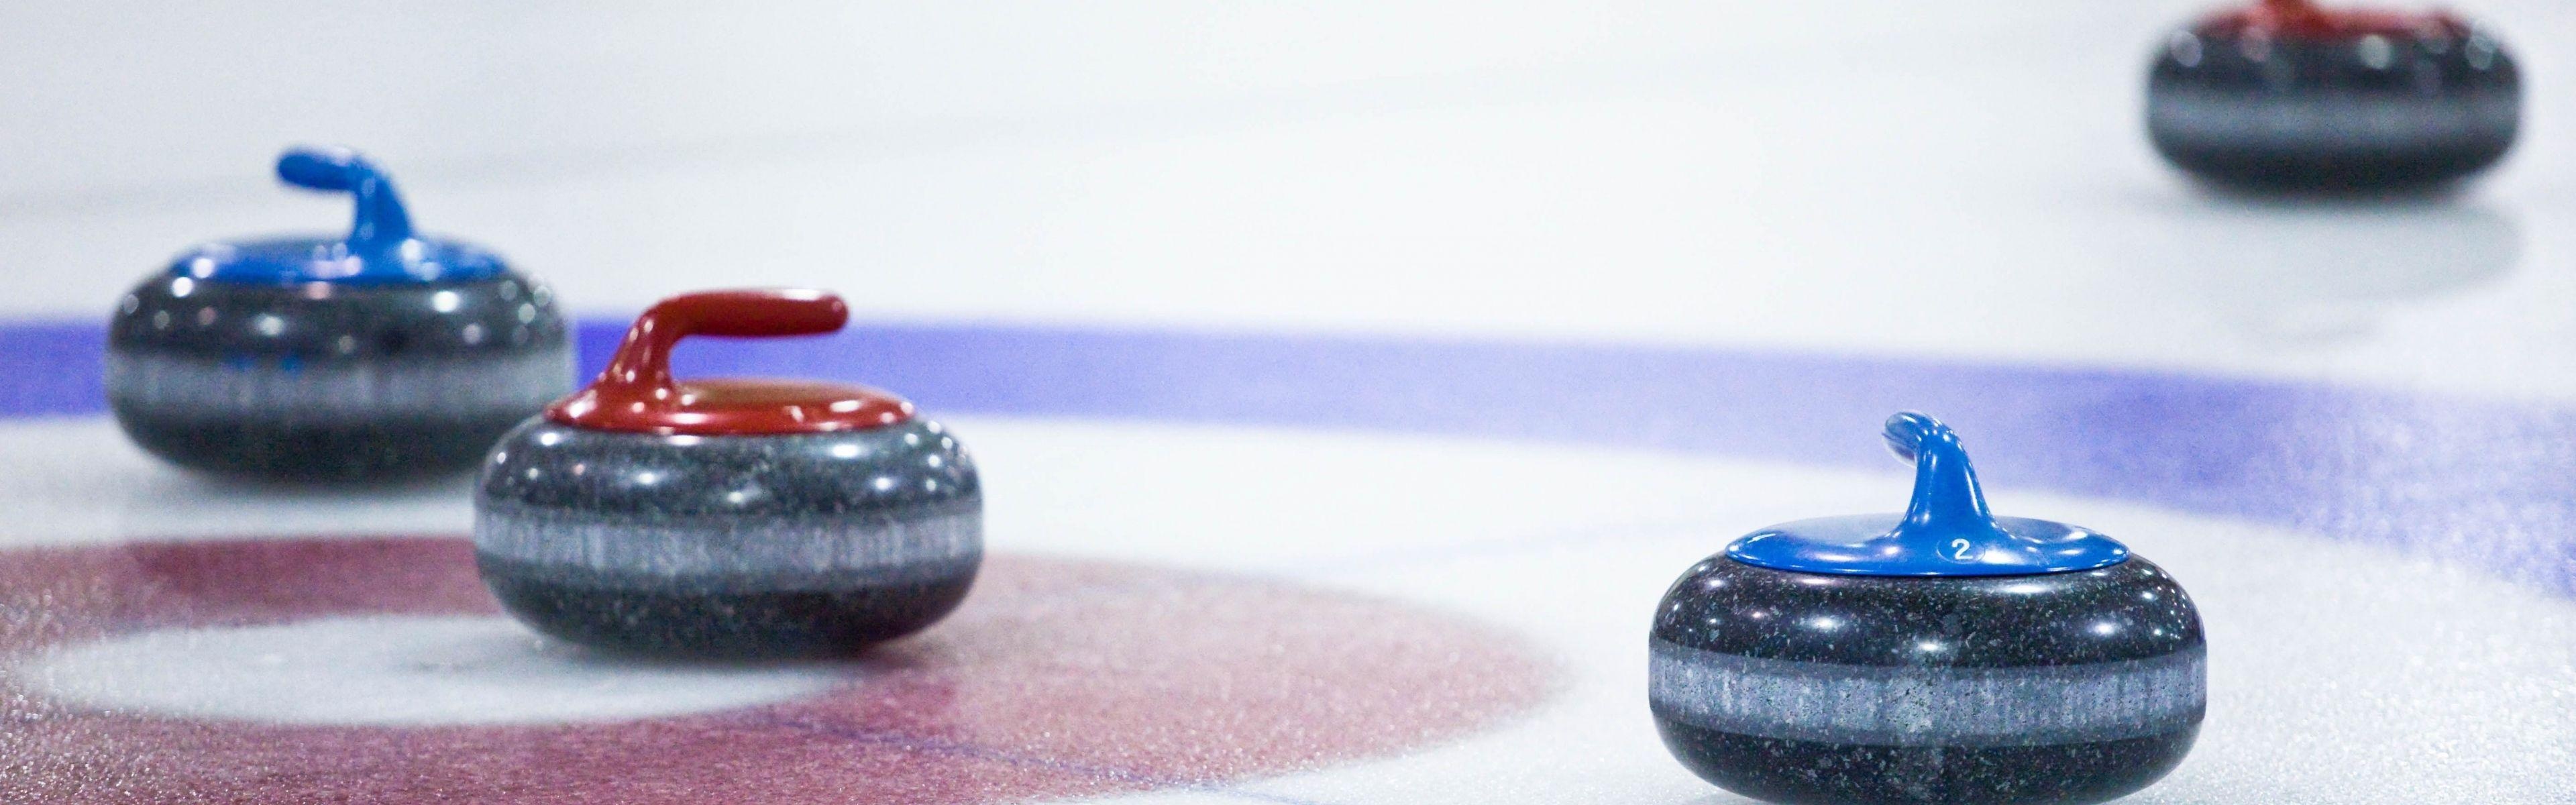 Curling: The granite rocks, Primary equipment for a popular competitive winter game. 3840x1200 Dual Screen Background.